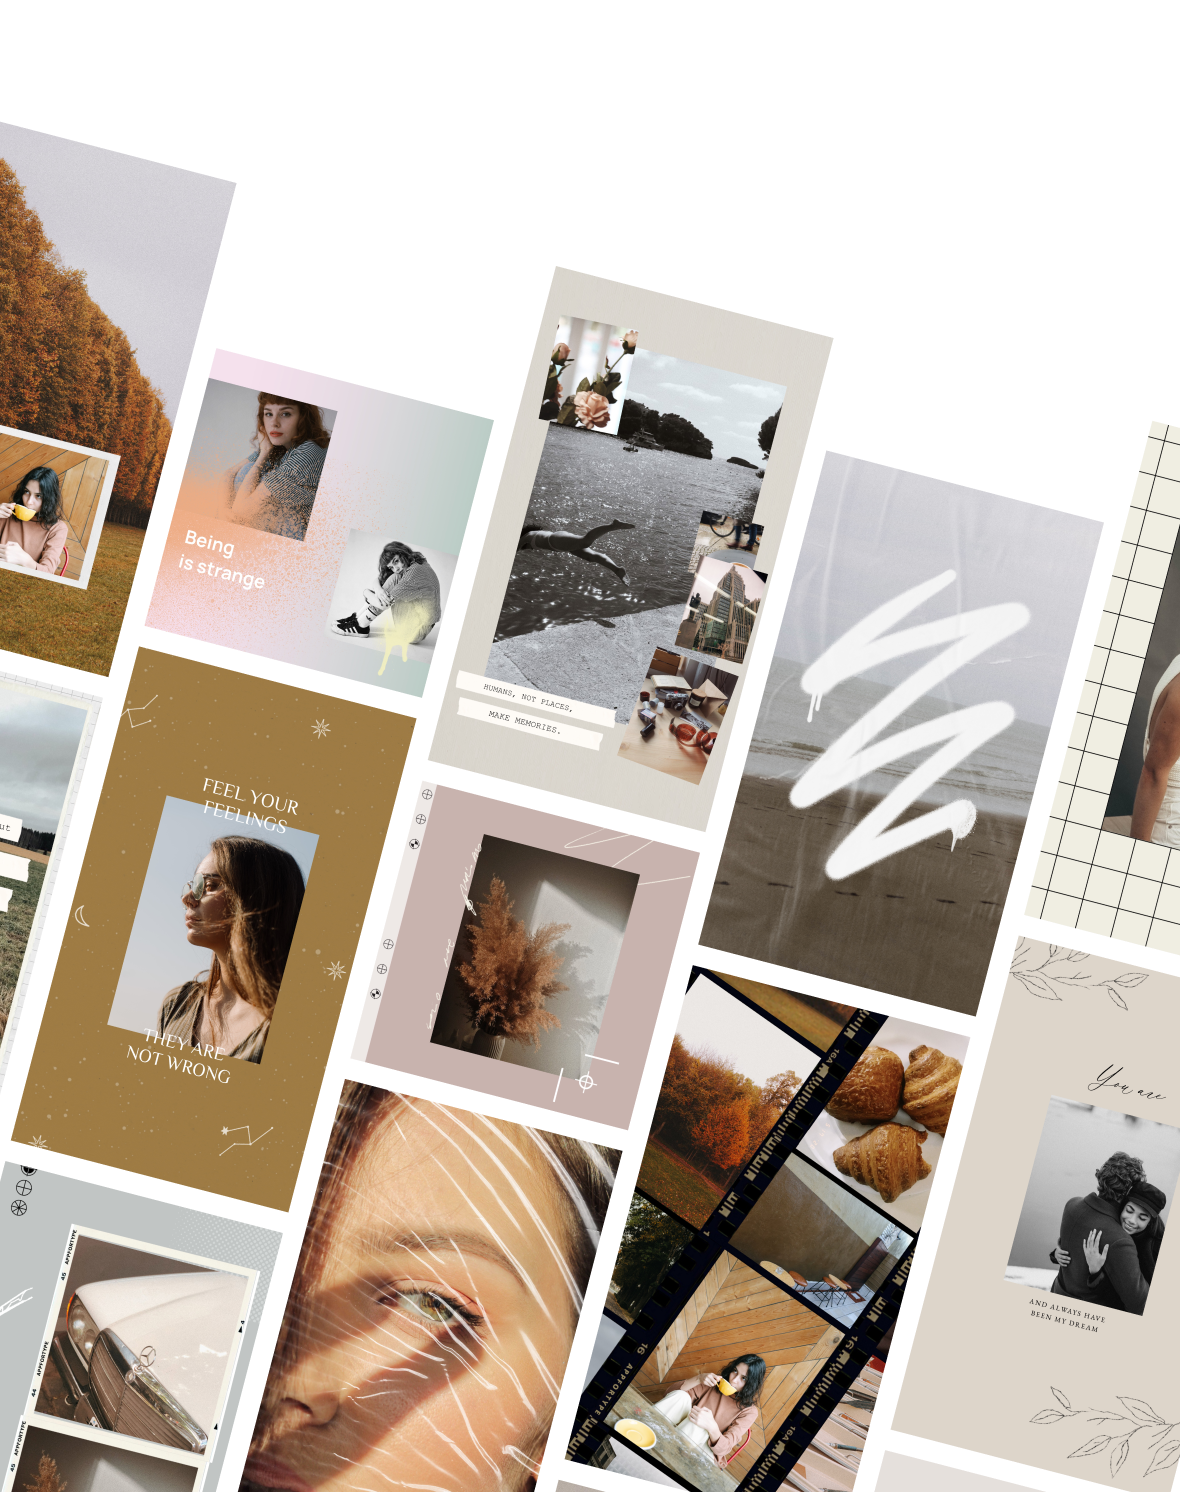 AppForType – create beautiful collages right in your phone